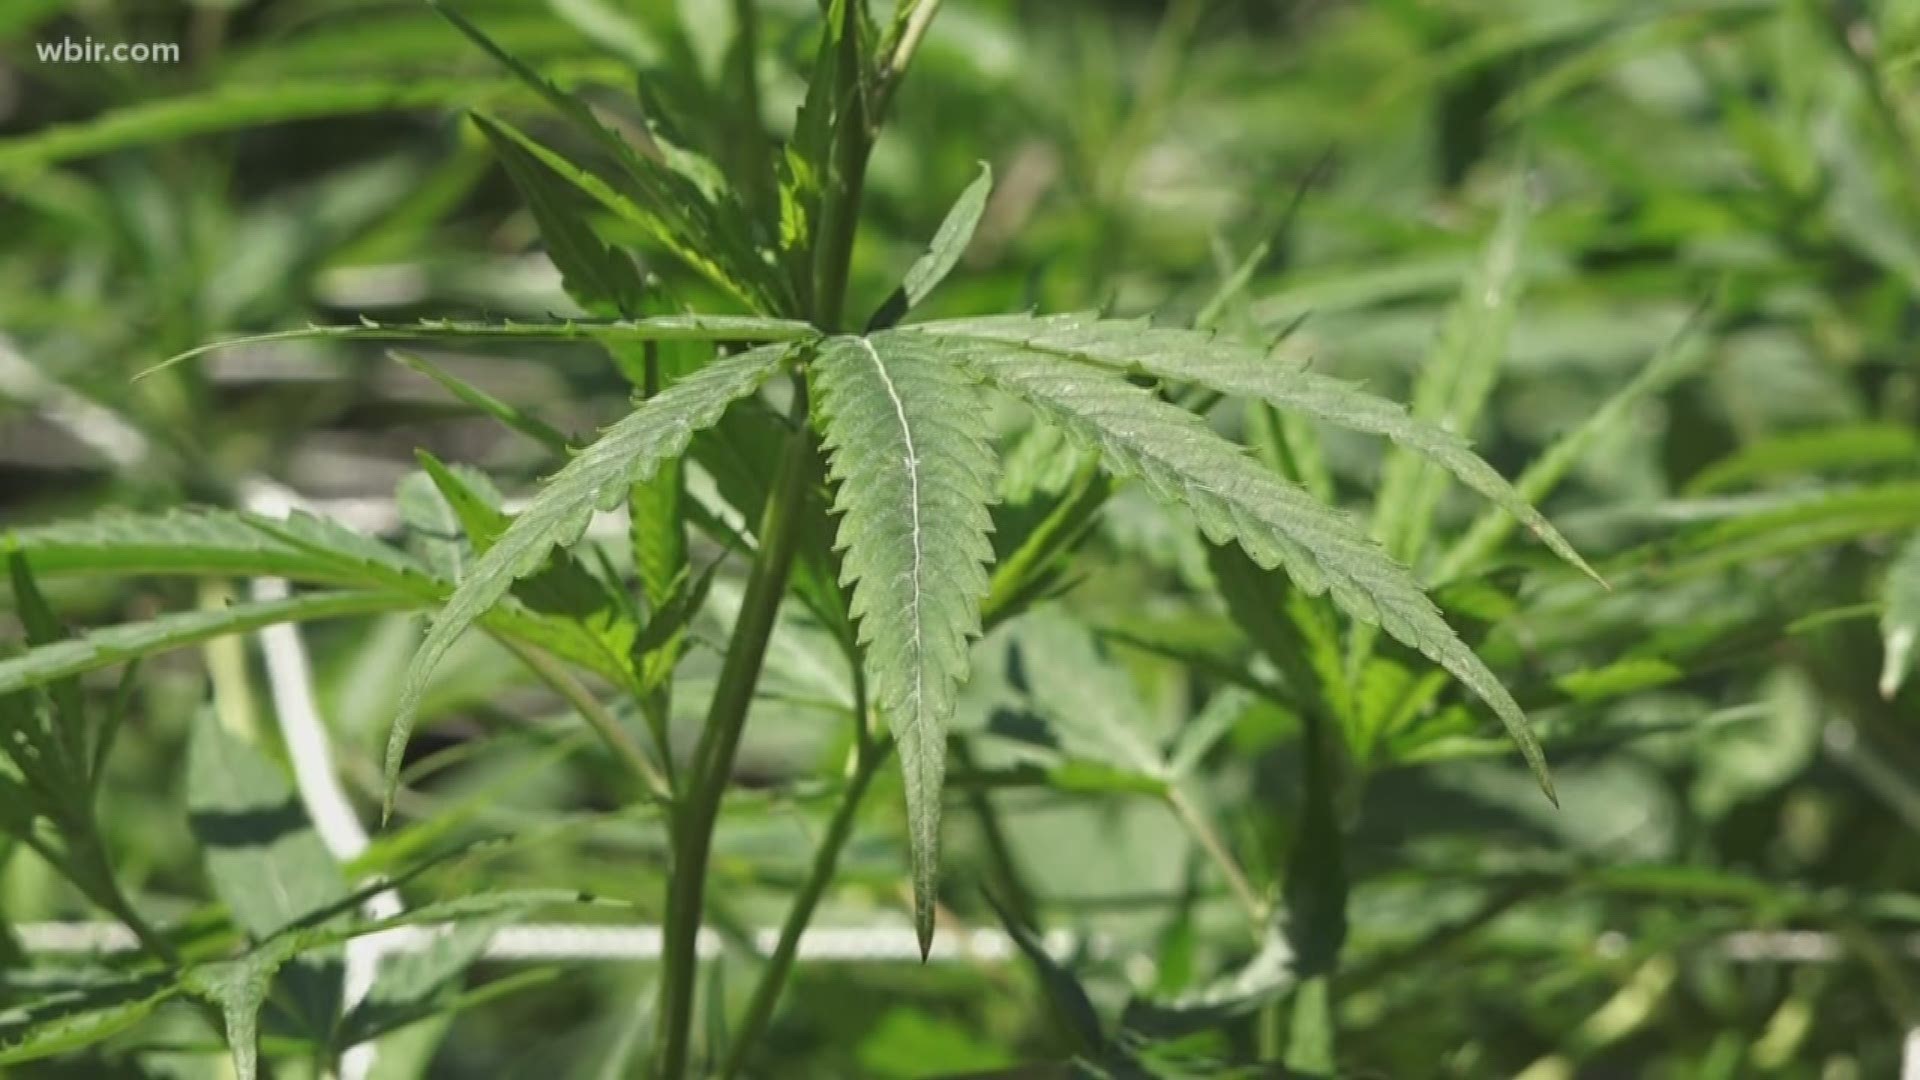 The State Agriculture Department says it's received more than 2,000 license applications to grow hemp.
Last year -- it only received between 200 to 300.